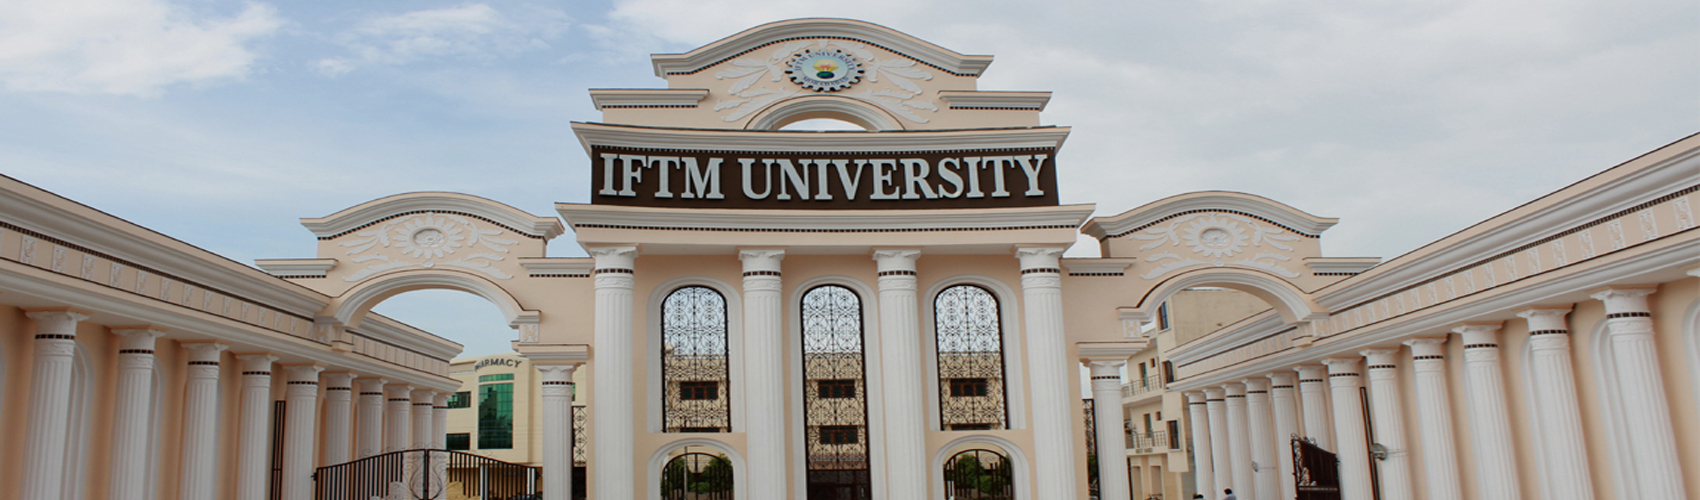 IFTM University Moradabad Hiring Faculty Posts for 31 Departments